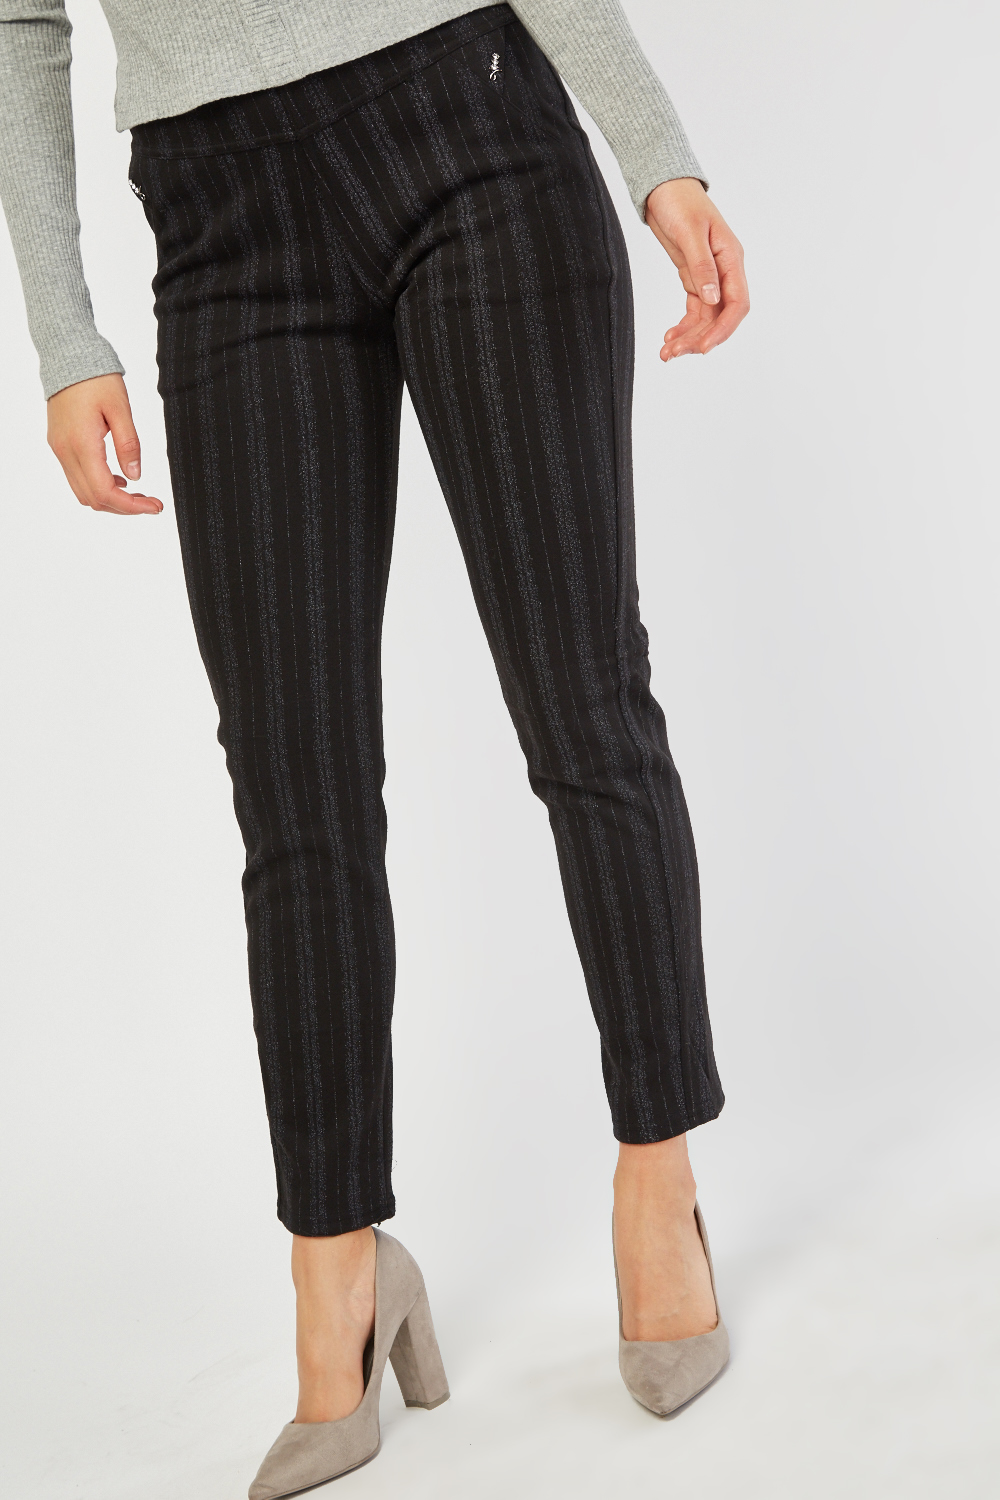 Faded Pin Striped Trousers - Just $7